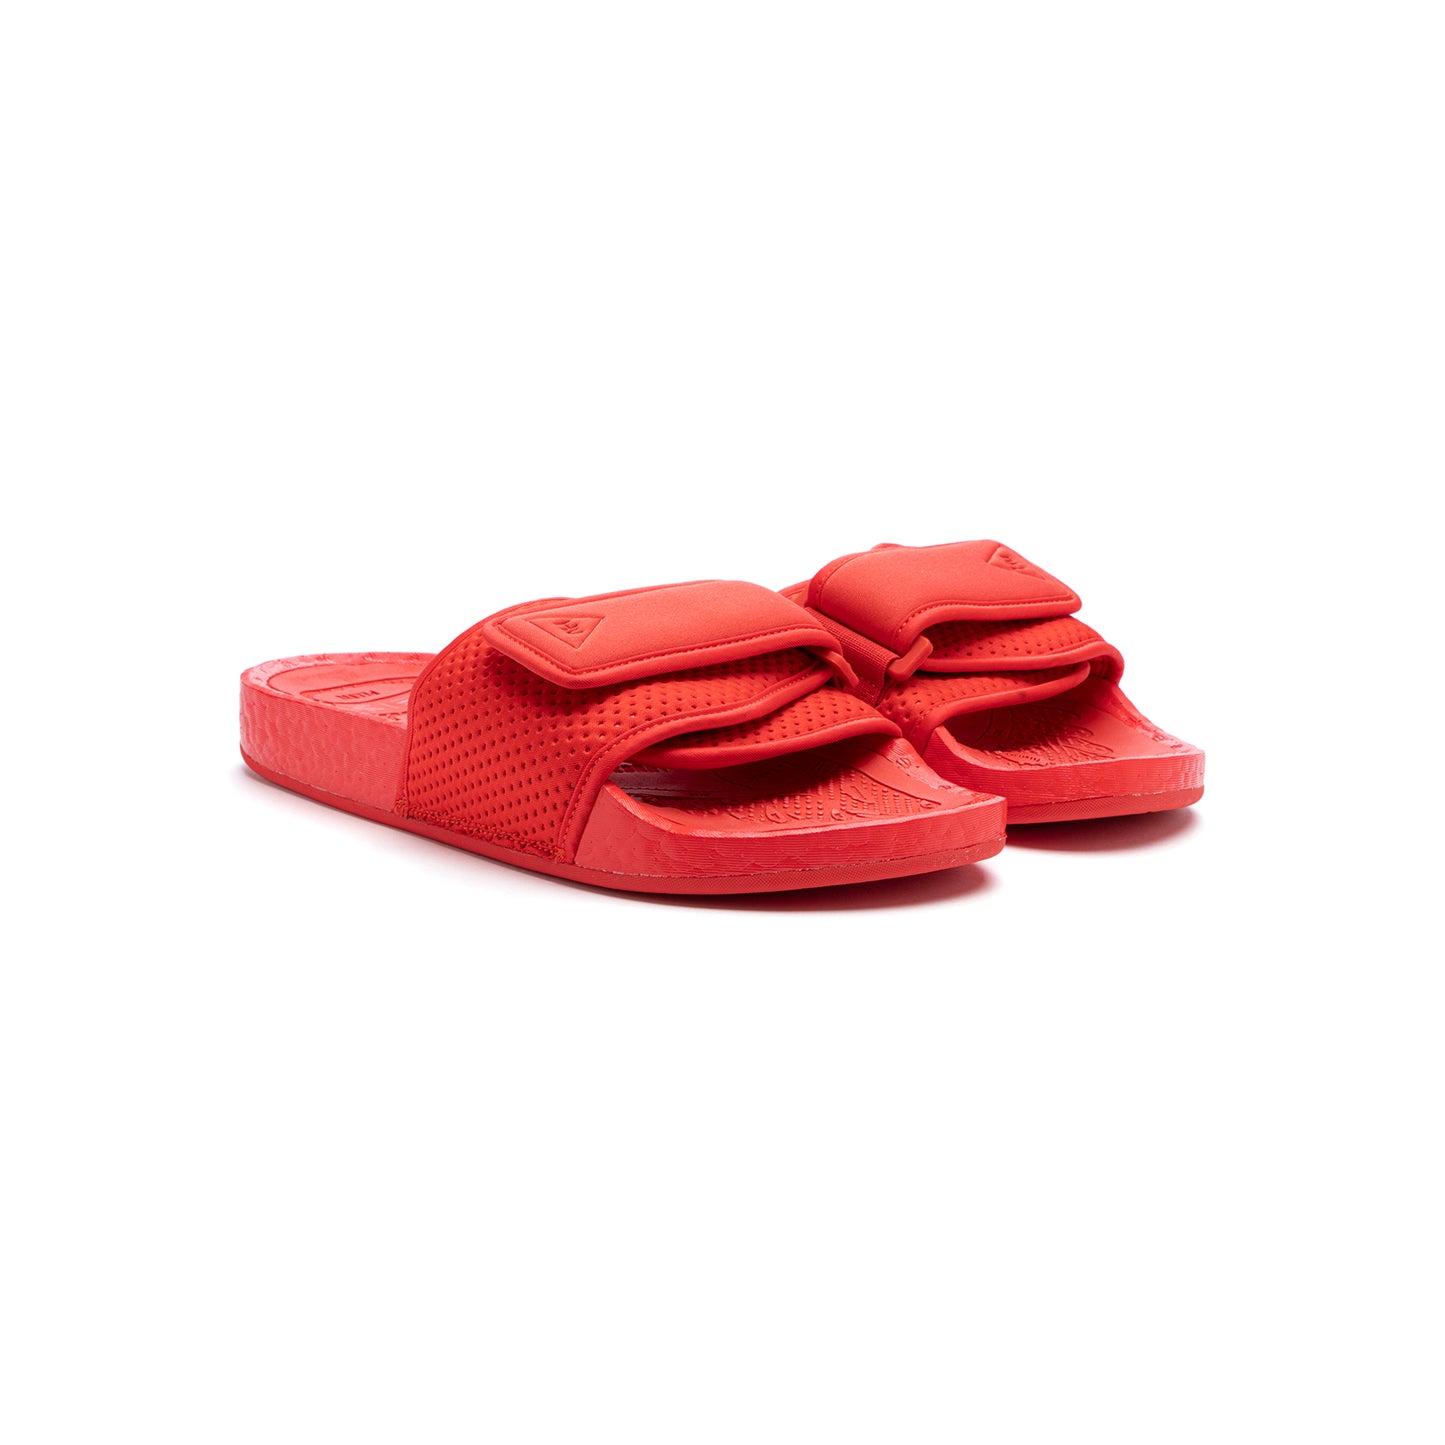 adidas x Pharrell Williams Boost Slide (Active Red)